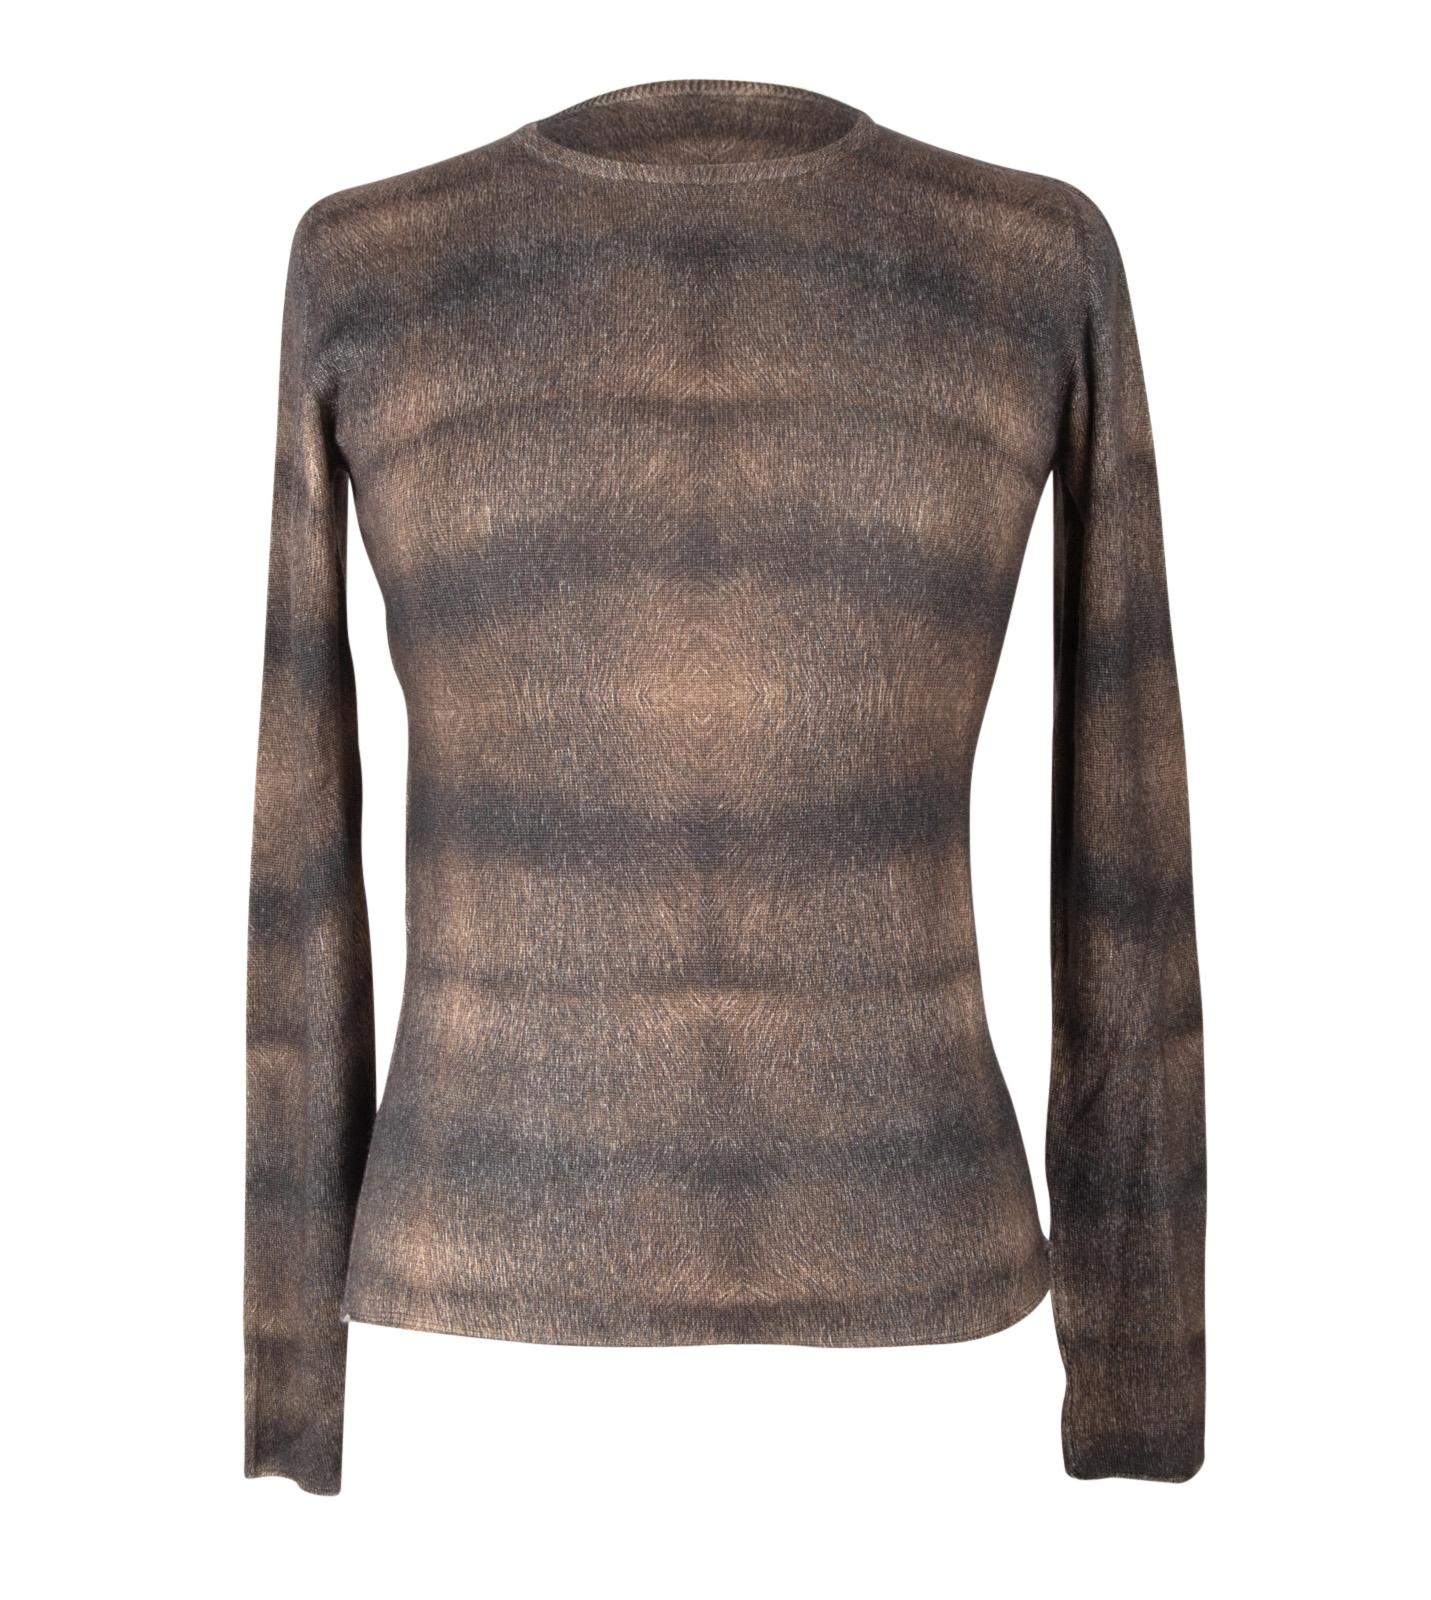 Guaranteed authentic Lucien Pellat-Finet buttery soft top.
Long sleeve, round neck top.  
Brown and black faint stripe with a beautiful pattern that looks textured.
Fabric is cashmere and silk .
final sale
  
SIZE M

TOP MEASURES: 
LENGTH  